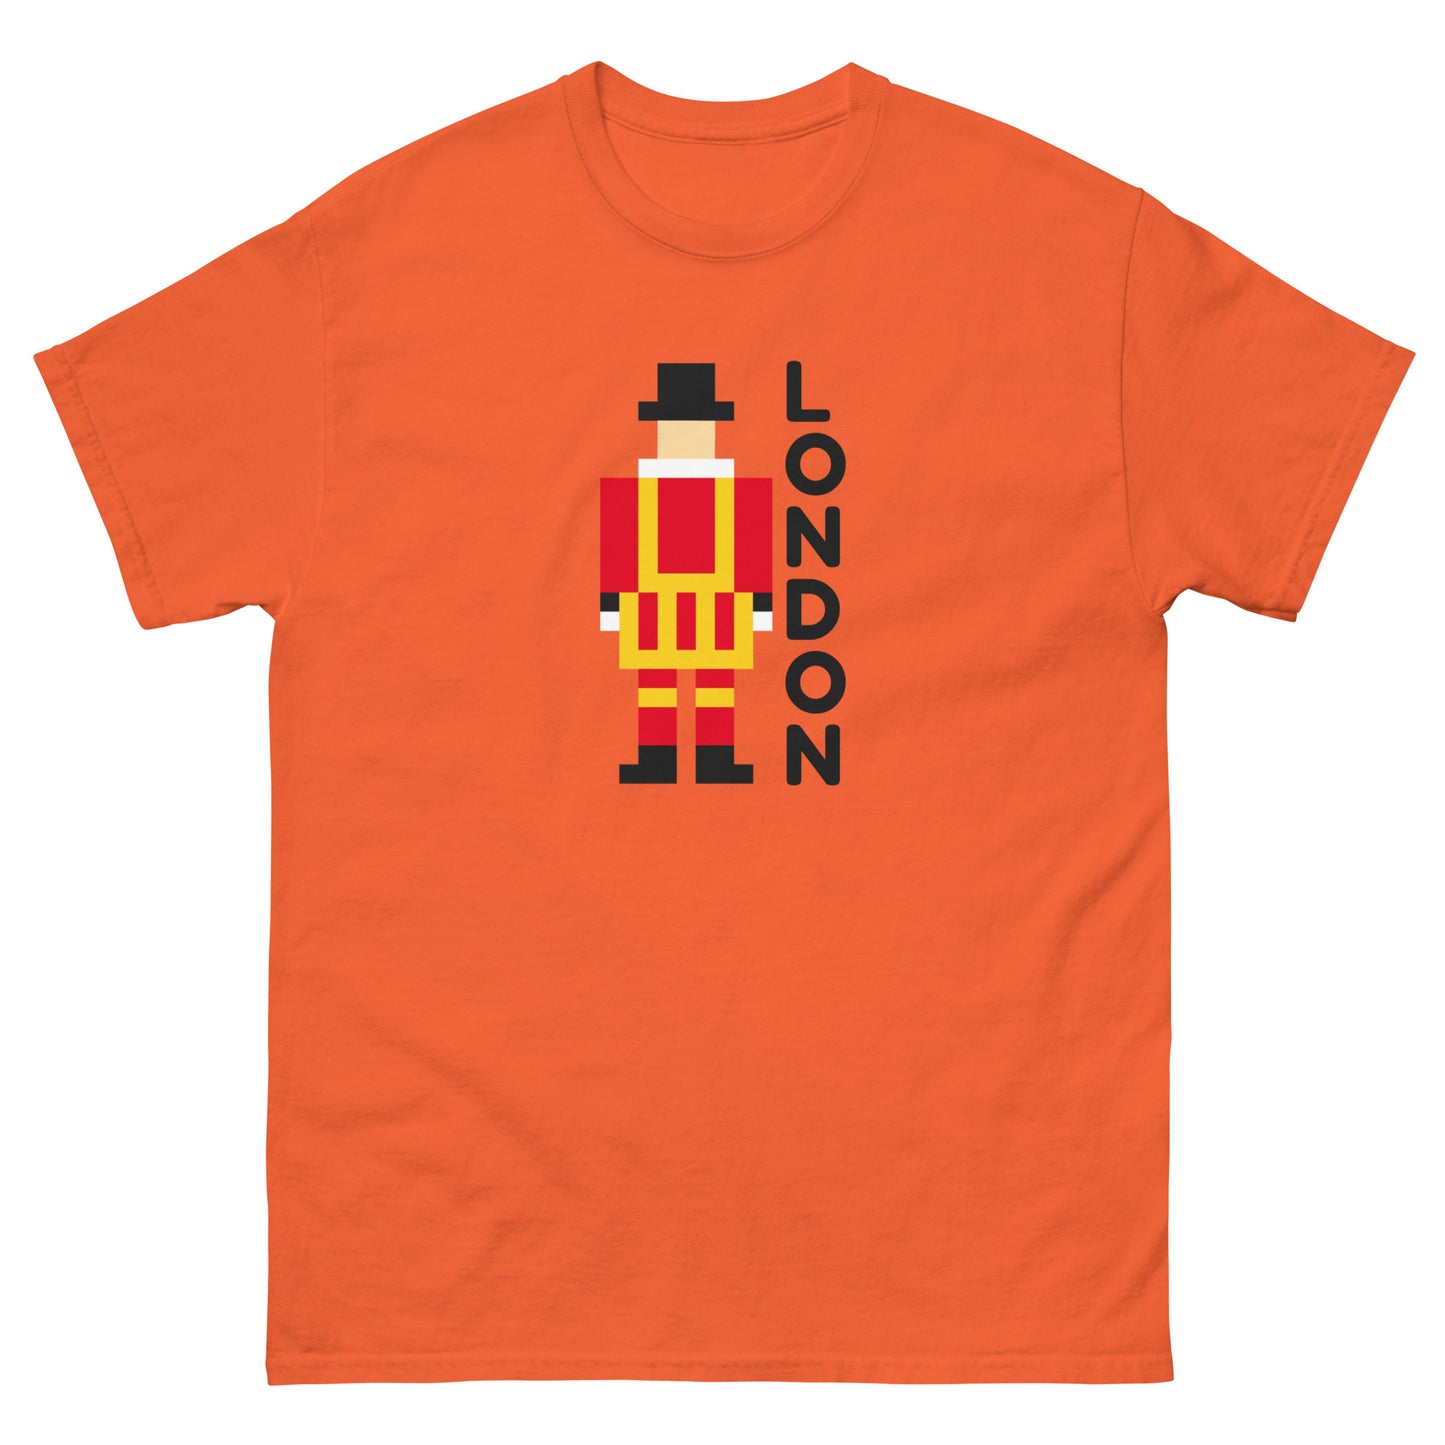 Royal Guard AKA Tower of London Beefeater Pixelated Design t-shirt